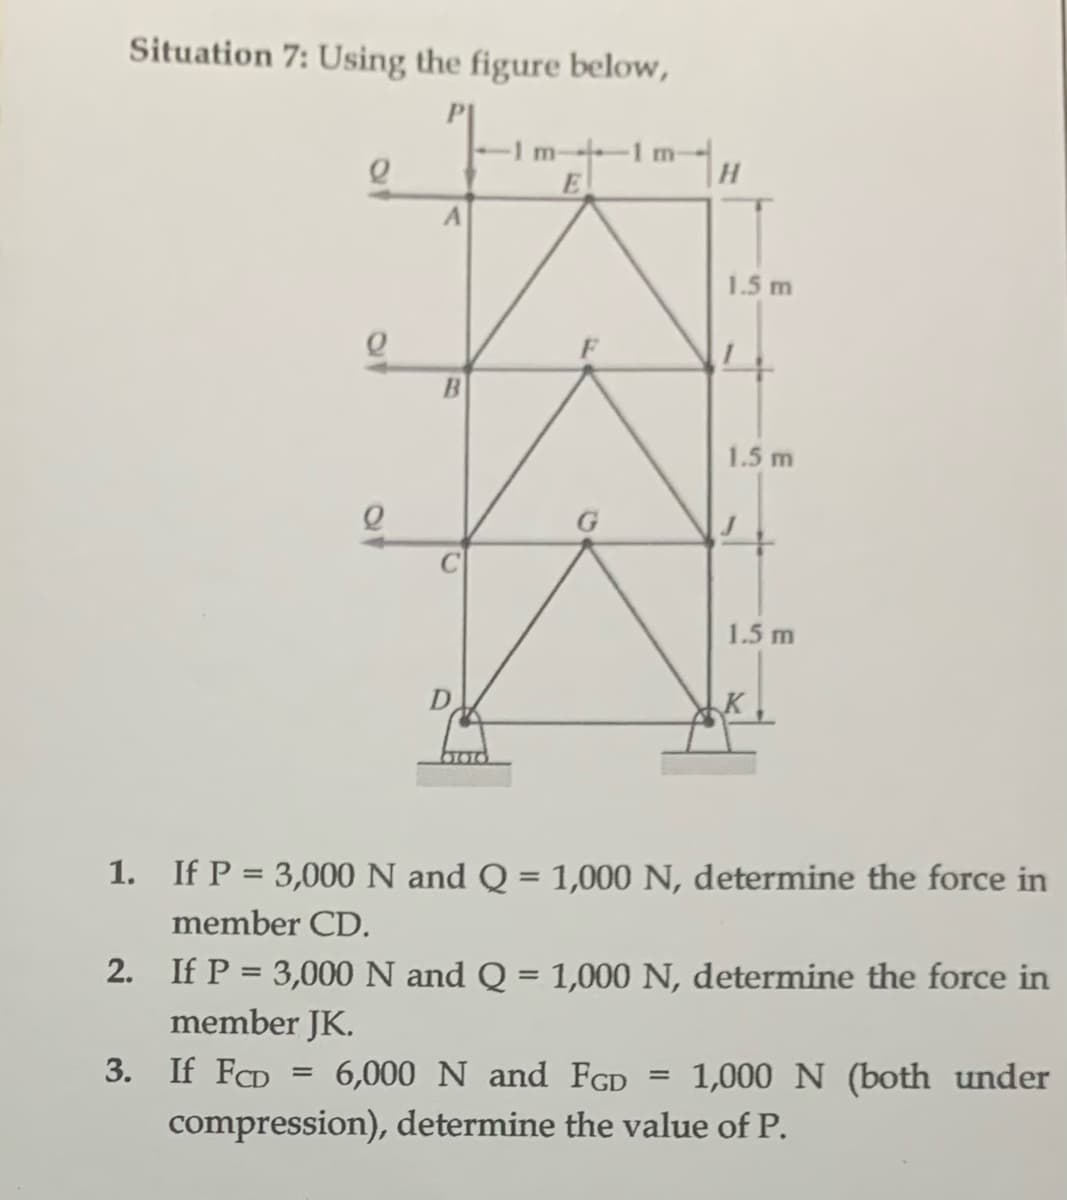 Situation 7: Using the figure below,
m-1 m-
E
e
Q
A
B
G
H
1.5 m
=
1.5 m
1.5 m
1. If P = 3,000 N and Q = 1,000 N, determine the force in
member CD.
2. If P = 3,000 N and Q = 1,000 N, determine the force in
member JK.
3. If FCD = 6,000 N and FGD 1,000 N (both under
compression), determine the value of P.